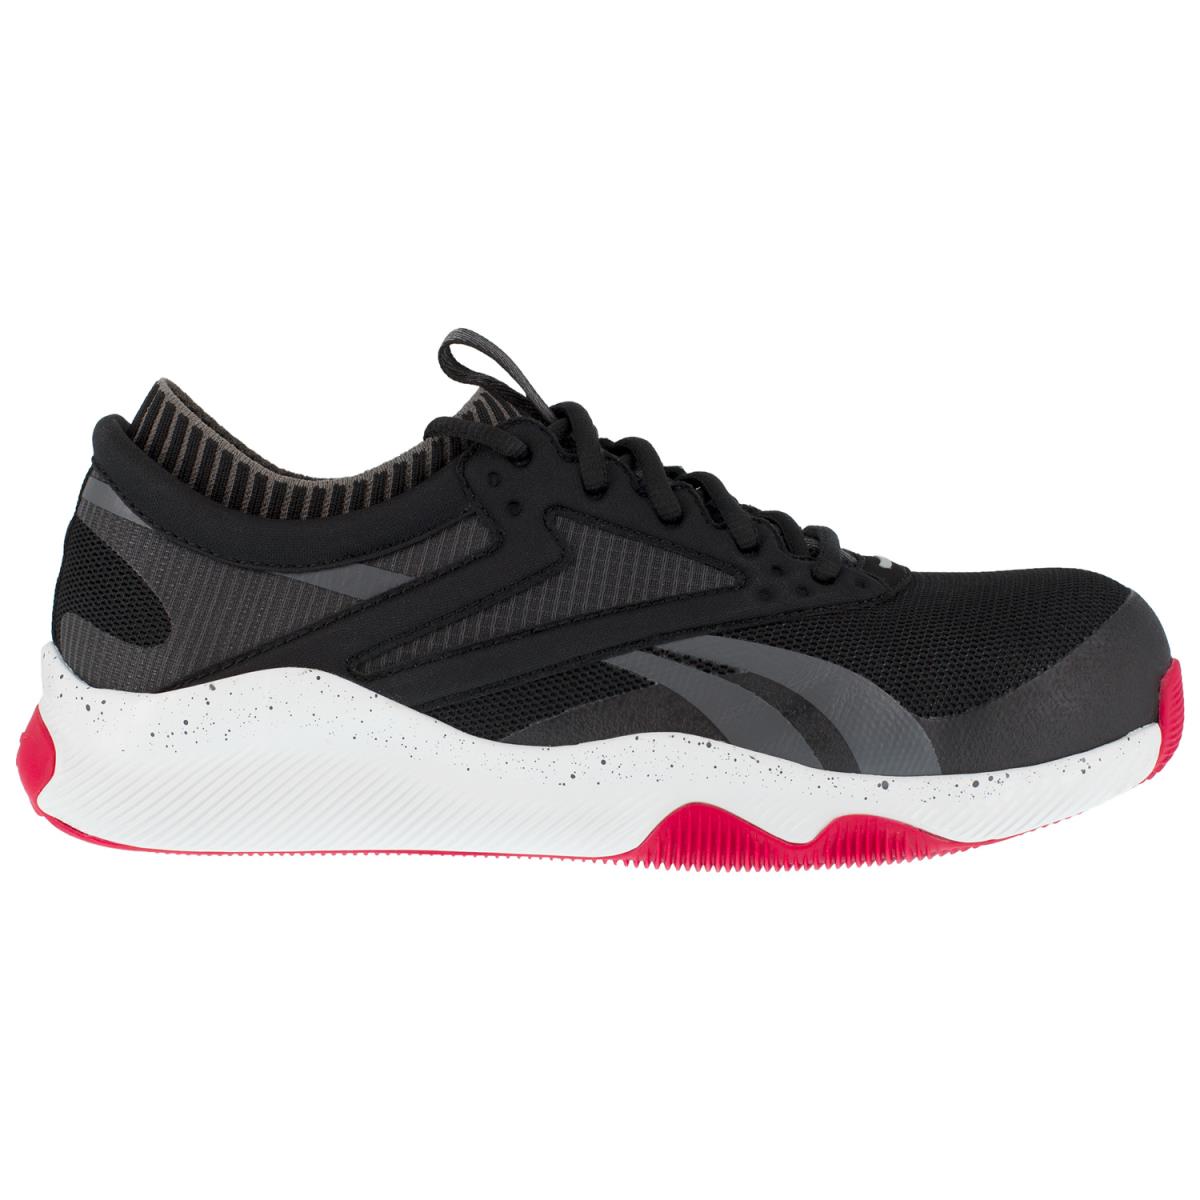 Reebok Mens Black/red Textile Work Shoes Hiit TR Athletic CT M